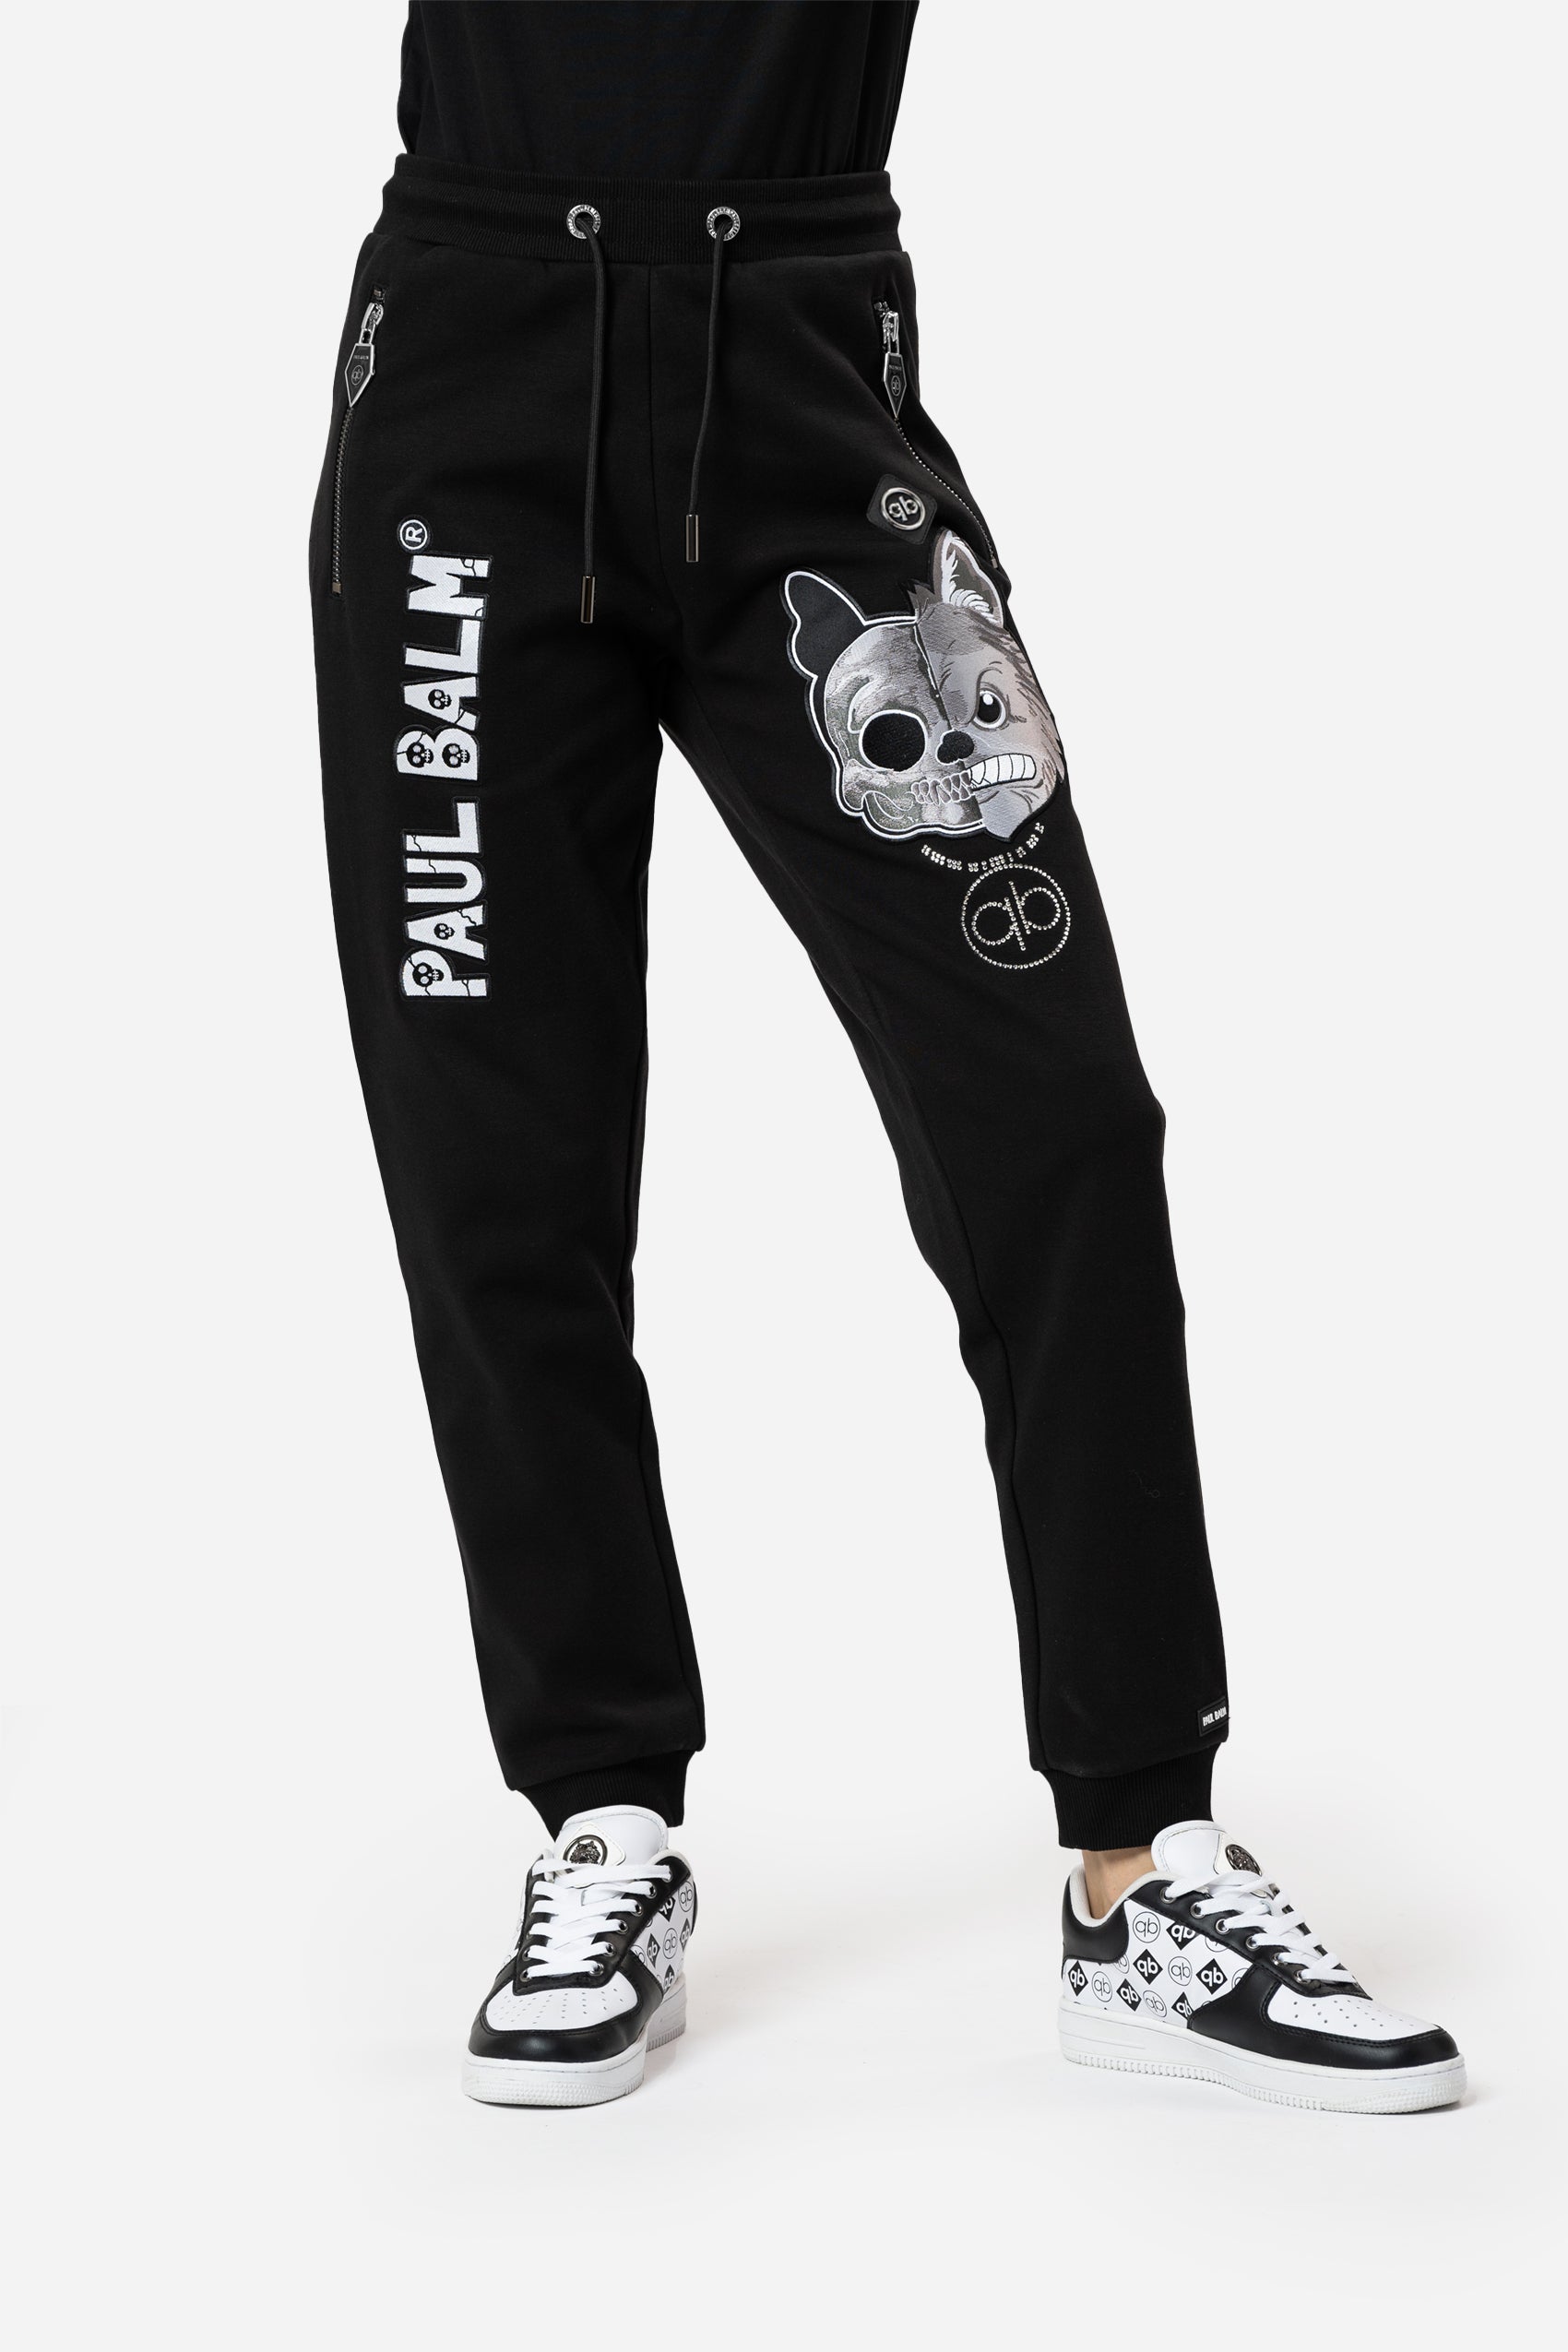 Embroidered Skull Pants - Limited to 300 - PAUL BALM WORLD